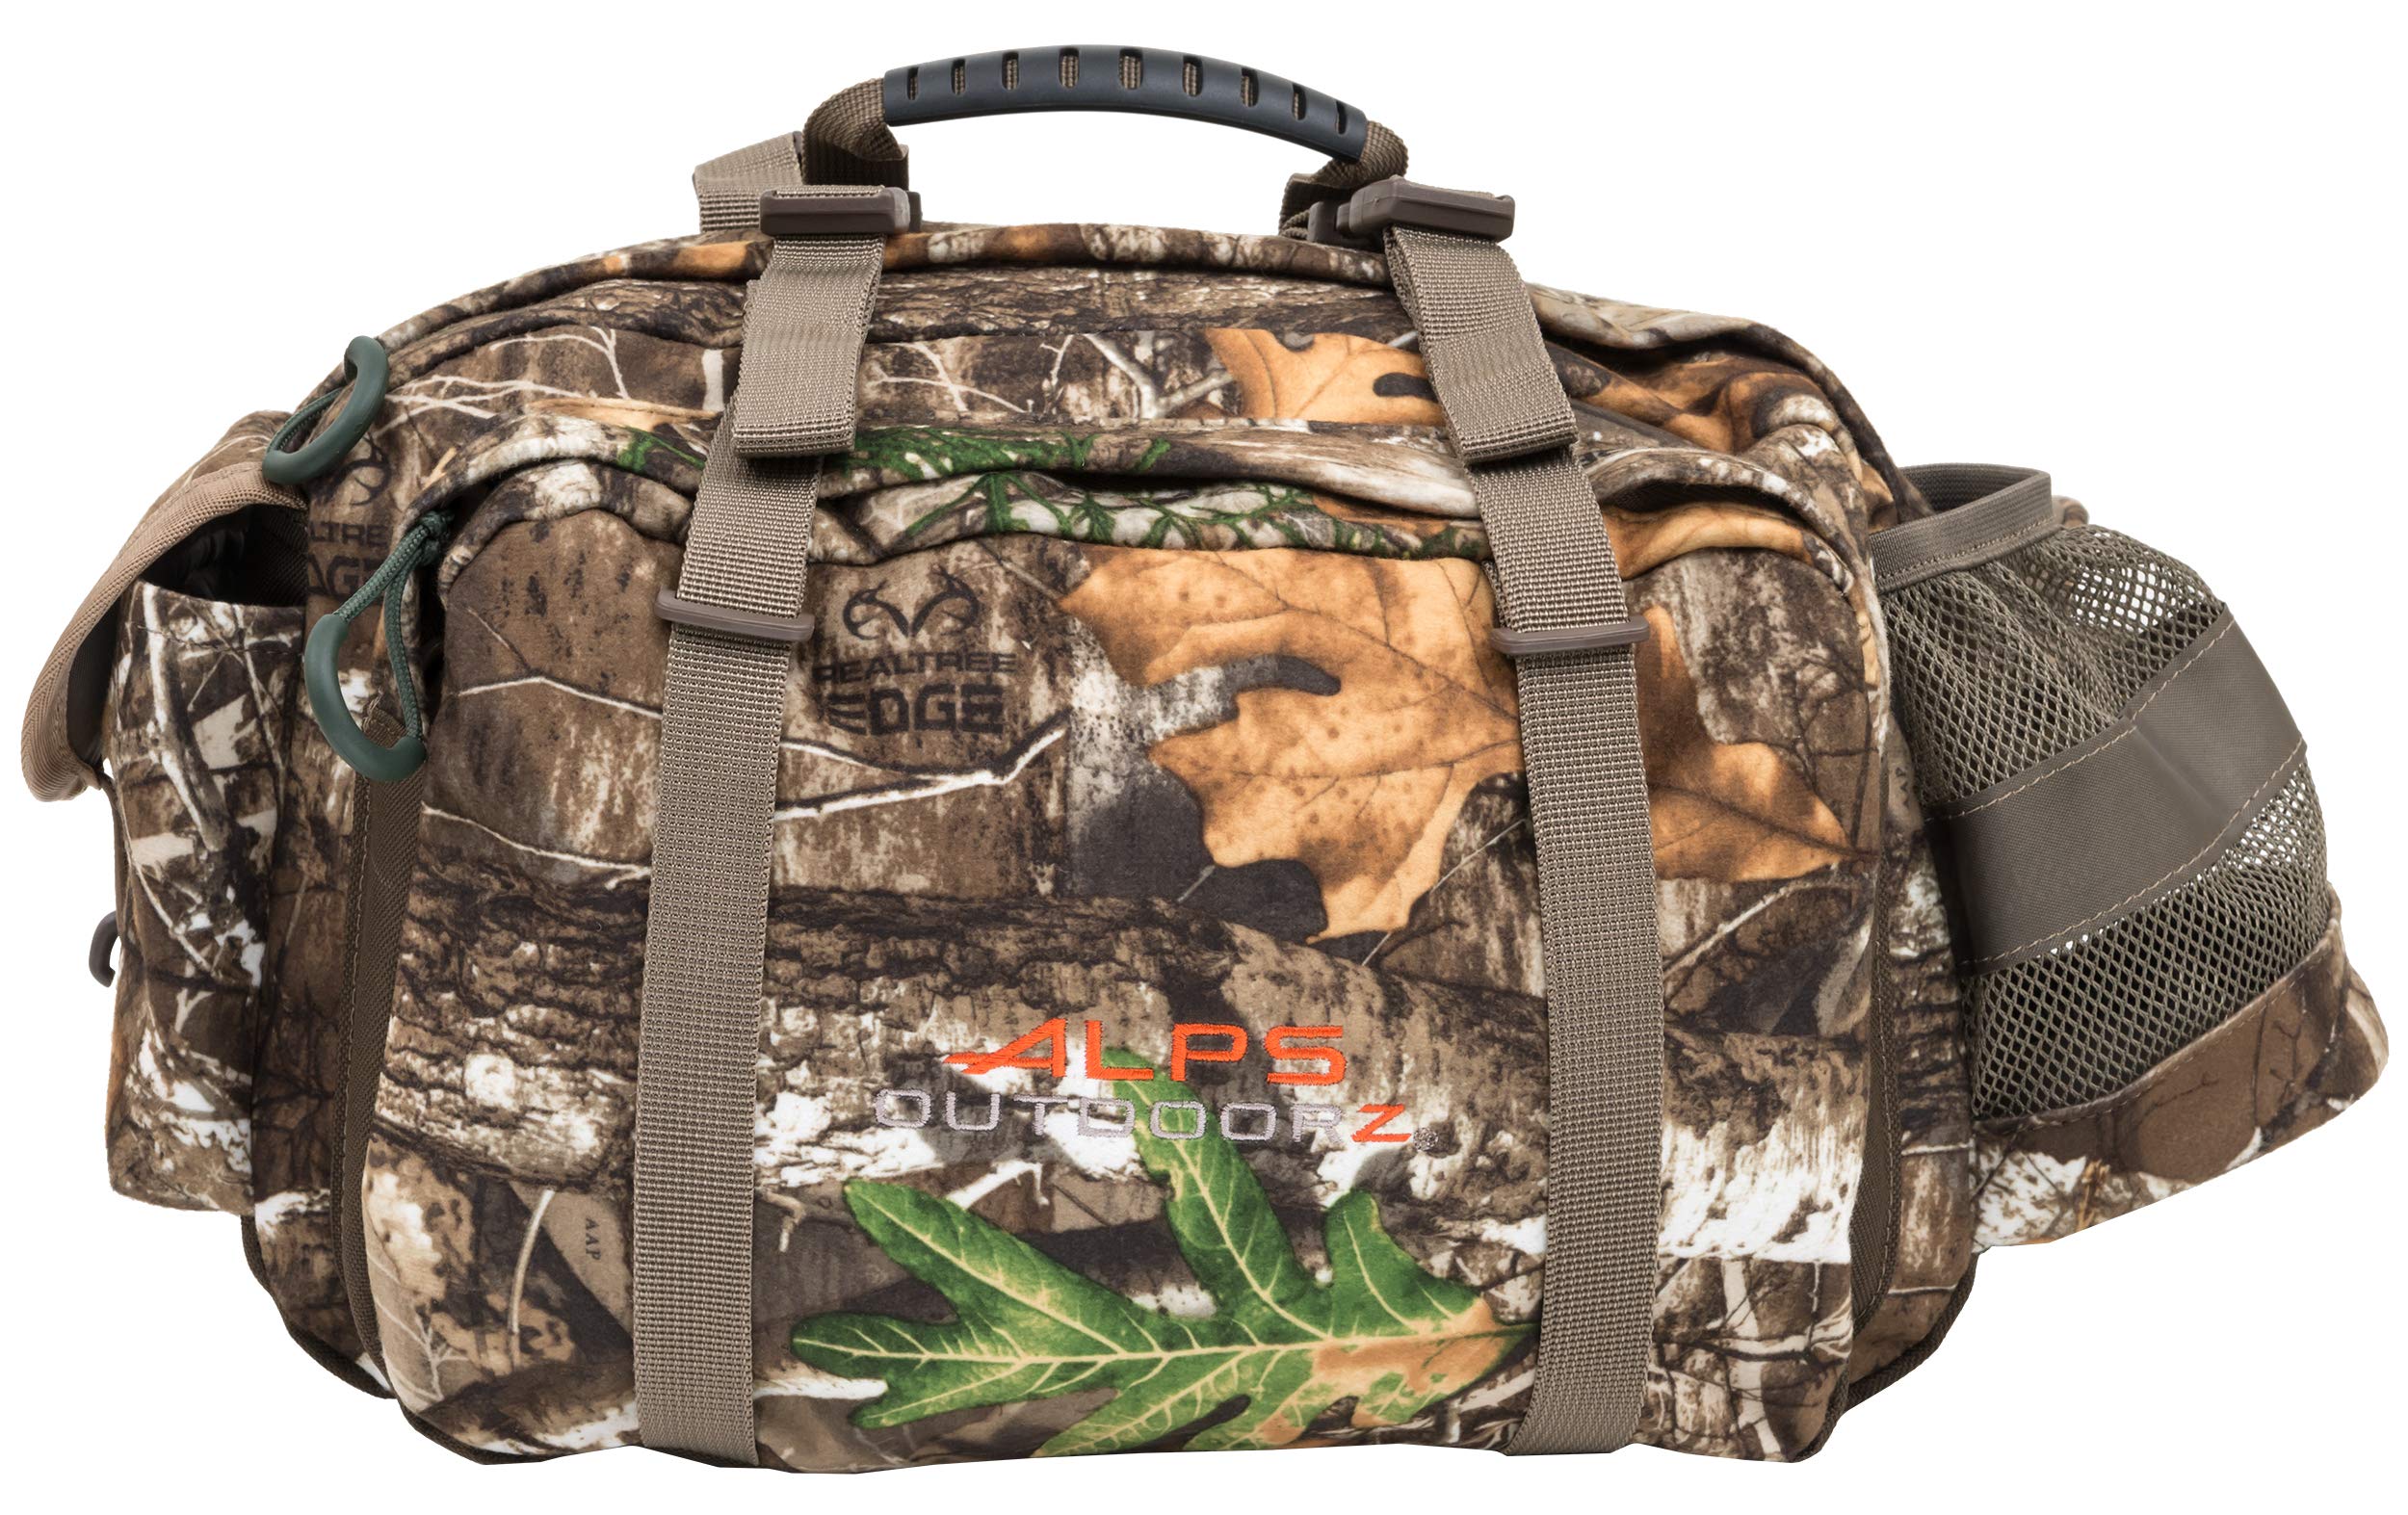 ALPS OutdoorZ Little Bear Hunting Pack